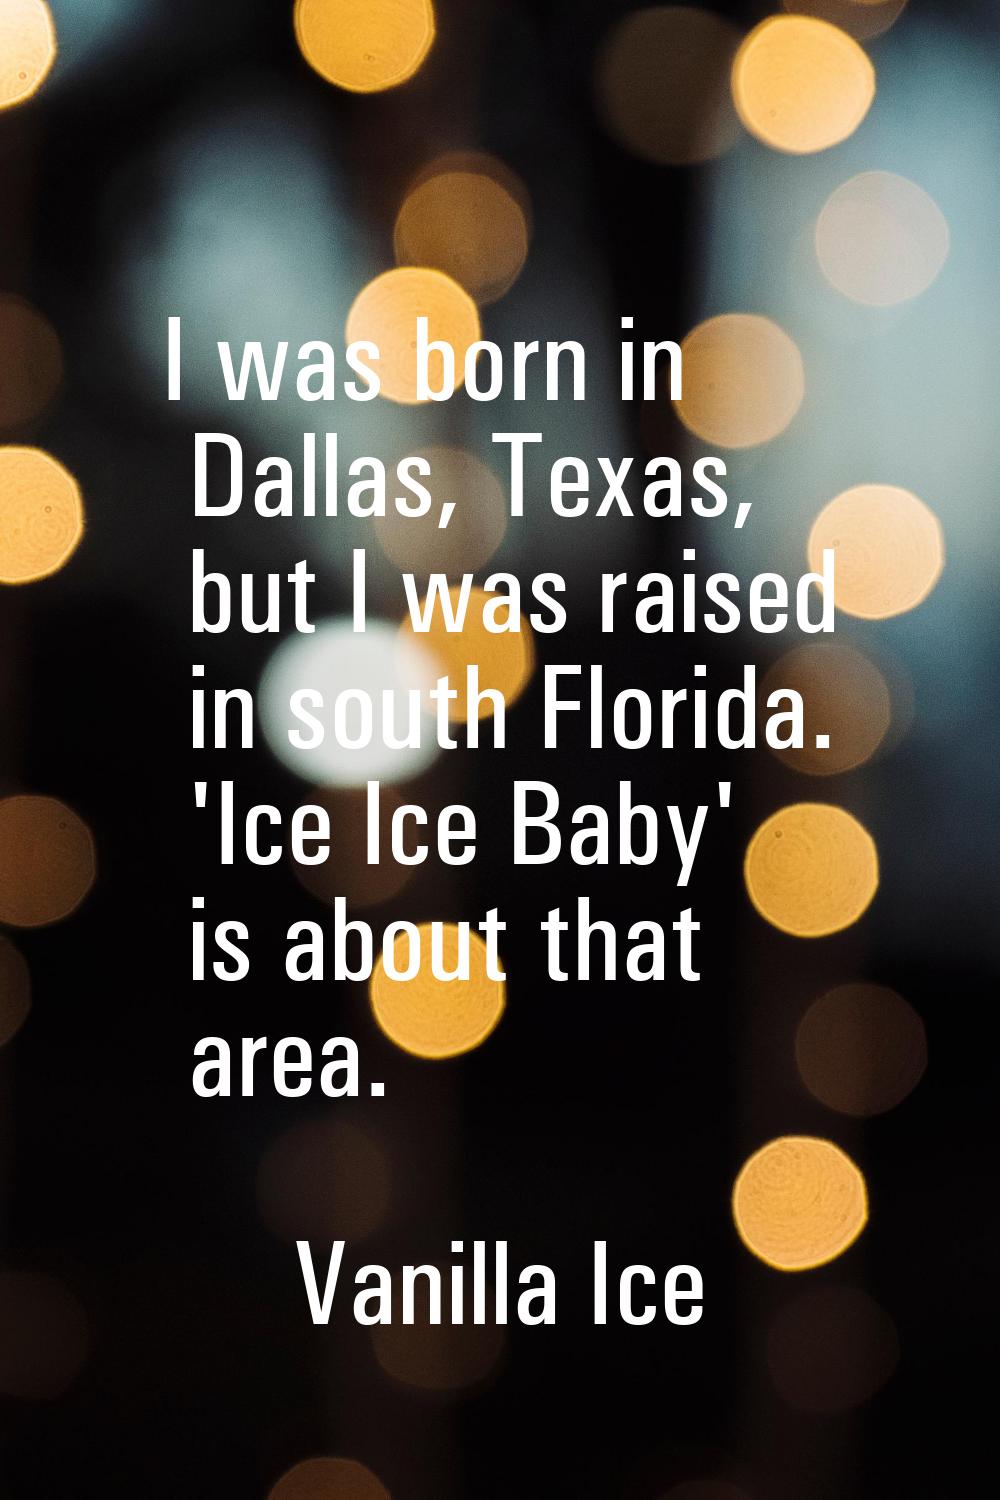 I was born in Dallas, Texas, but I was raised in south Florida. 'Ice Ice Baby' is about that area.